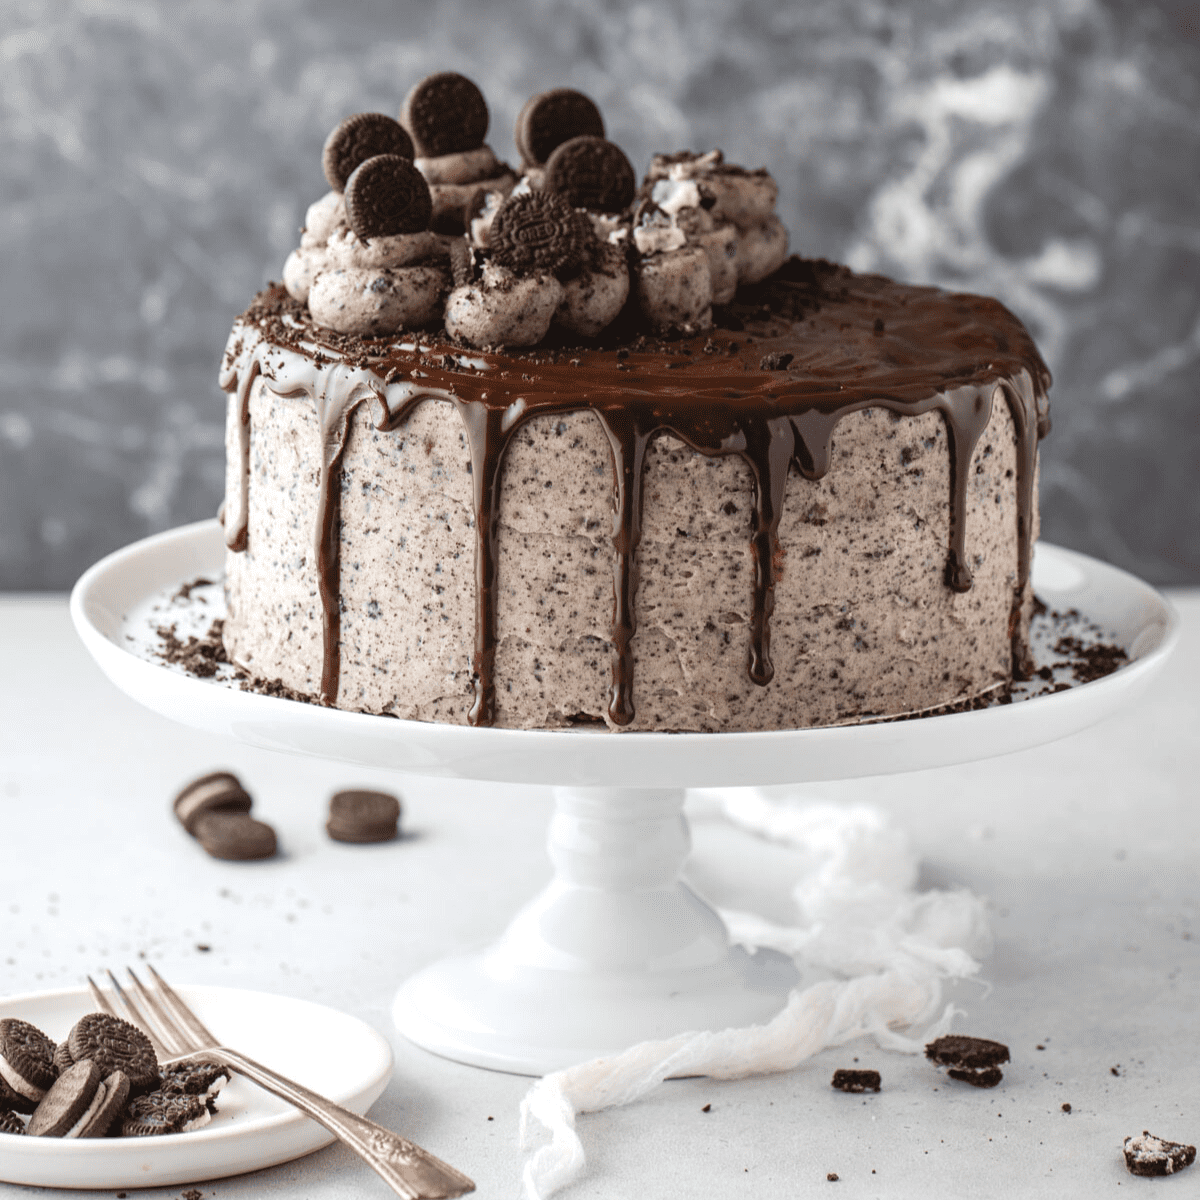 https://thefirstyearblog.com/wp-content/uploads/2022/07/Oreo-Cake-Square-2.png